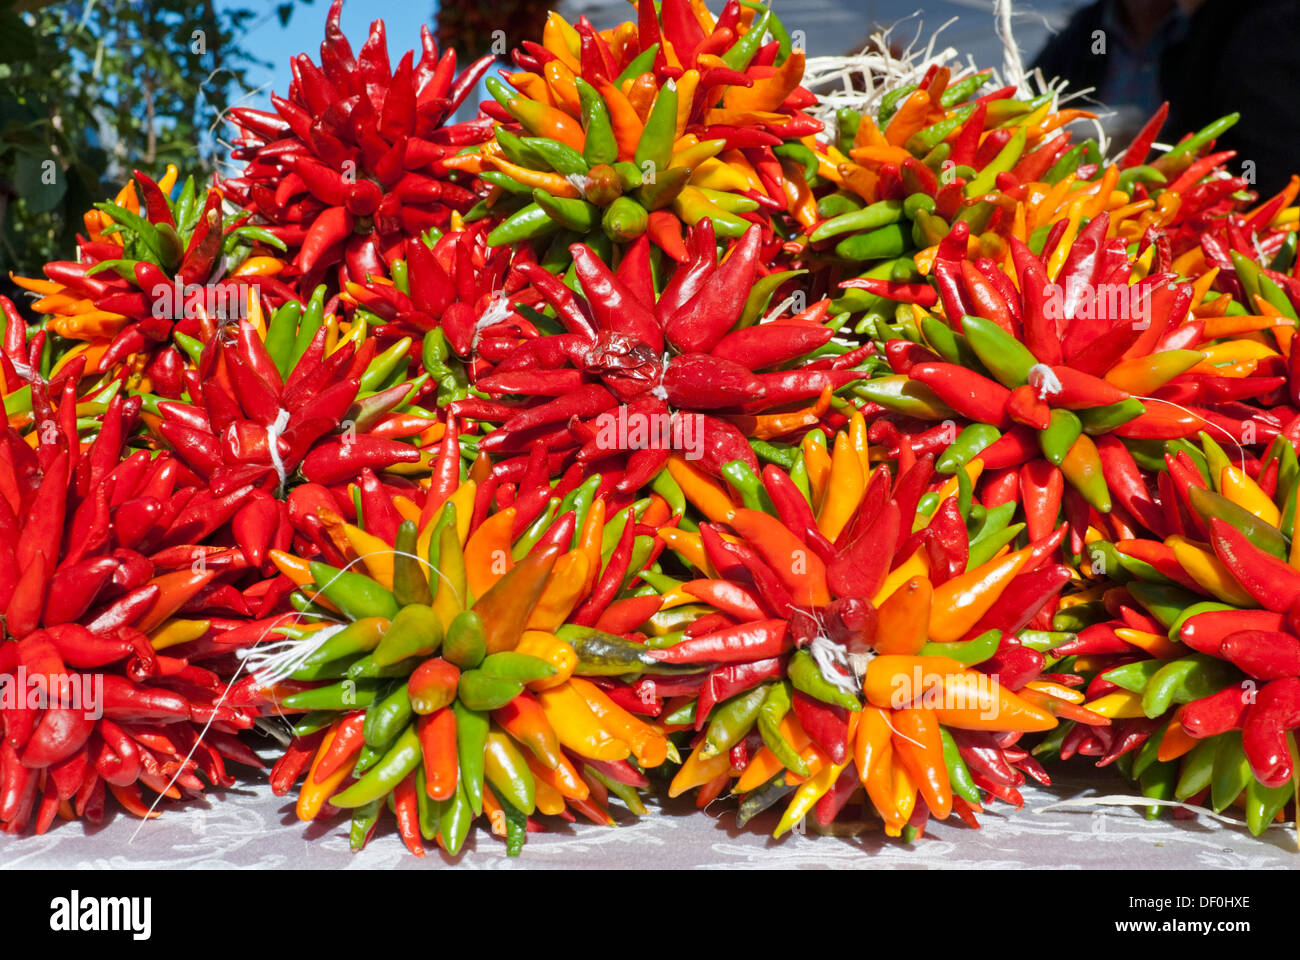 Chili peppers line tables at the Farmer's Market in Santa Fe. Stock Photo